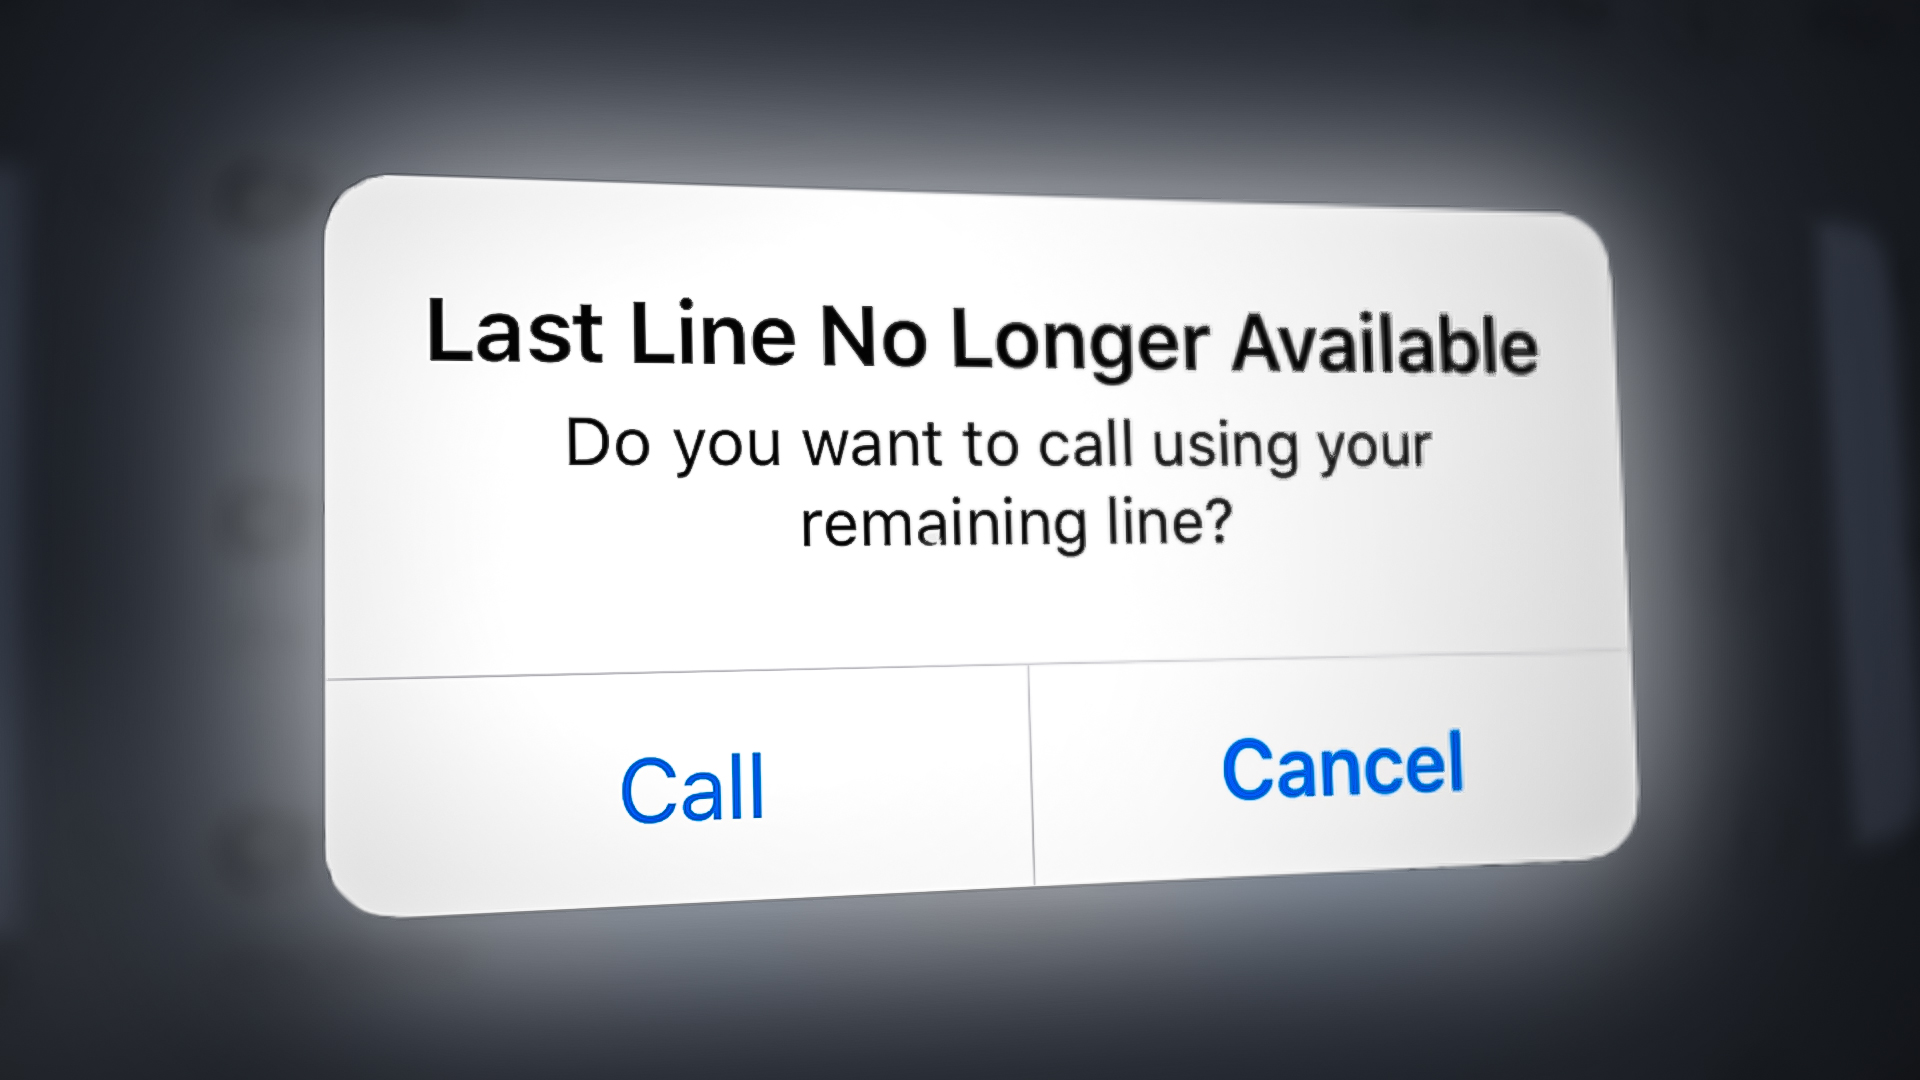 Last Line no Longer Available Error on iPhone